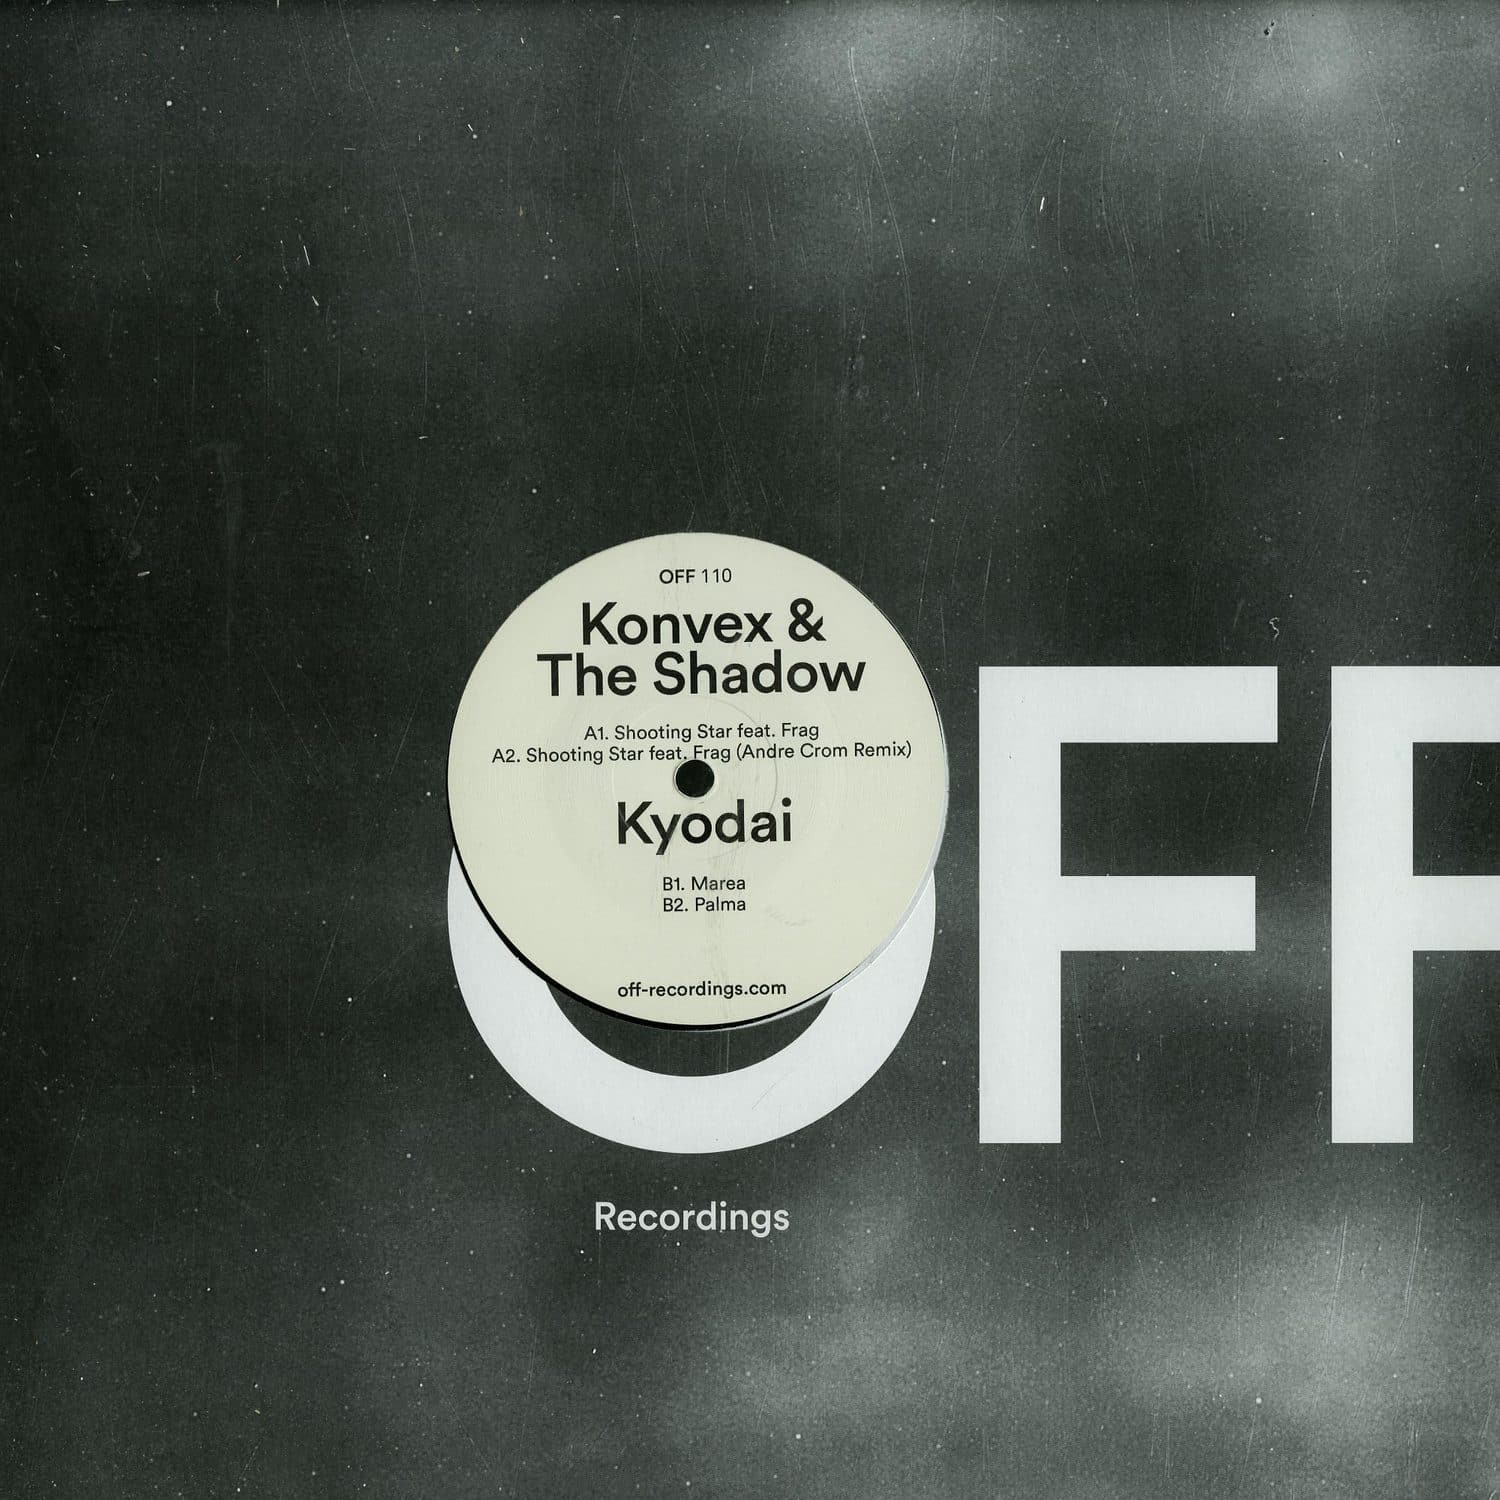 Konvex & The Shadow / Kyodai / Andre Crom - SHOOTING STAR / MAREA EP